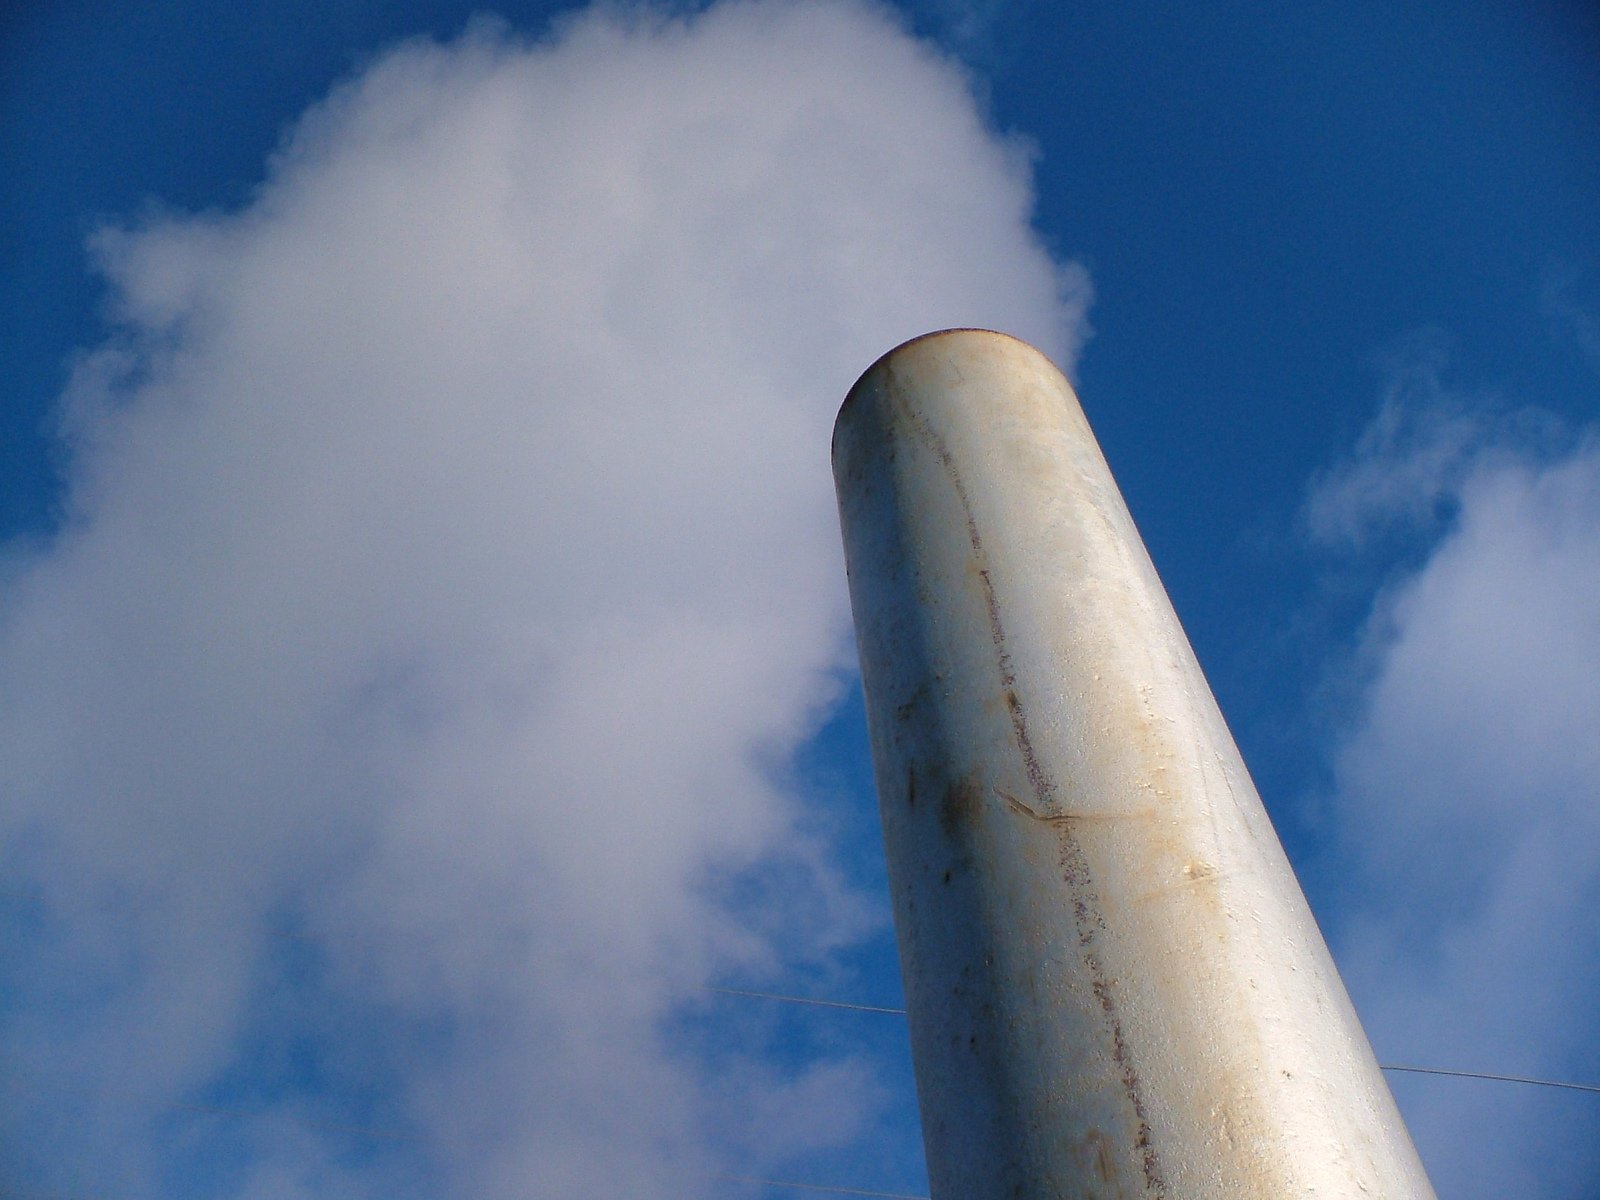 a close up of a metal pole in front of a sky with clouds